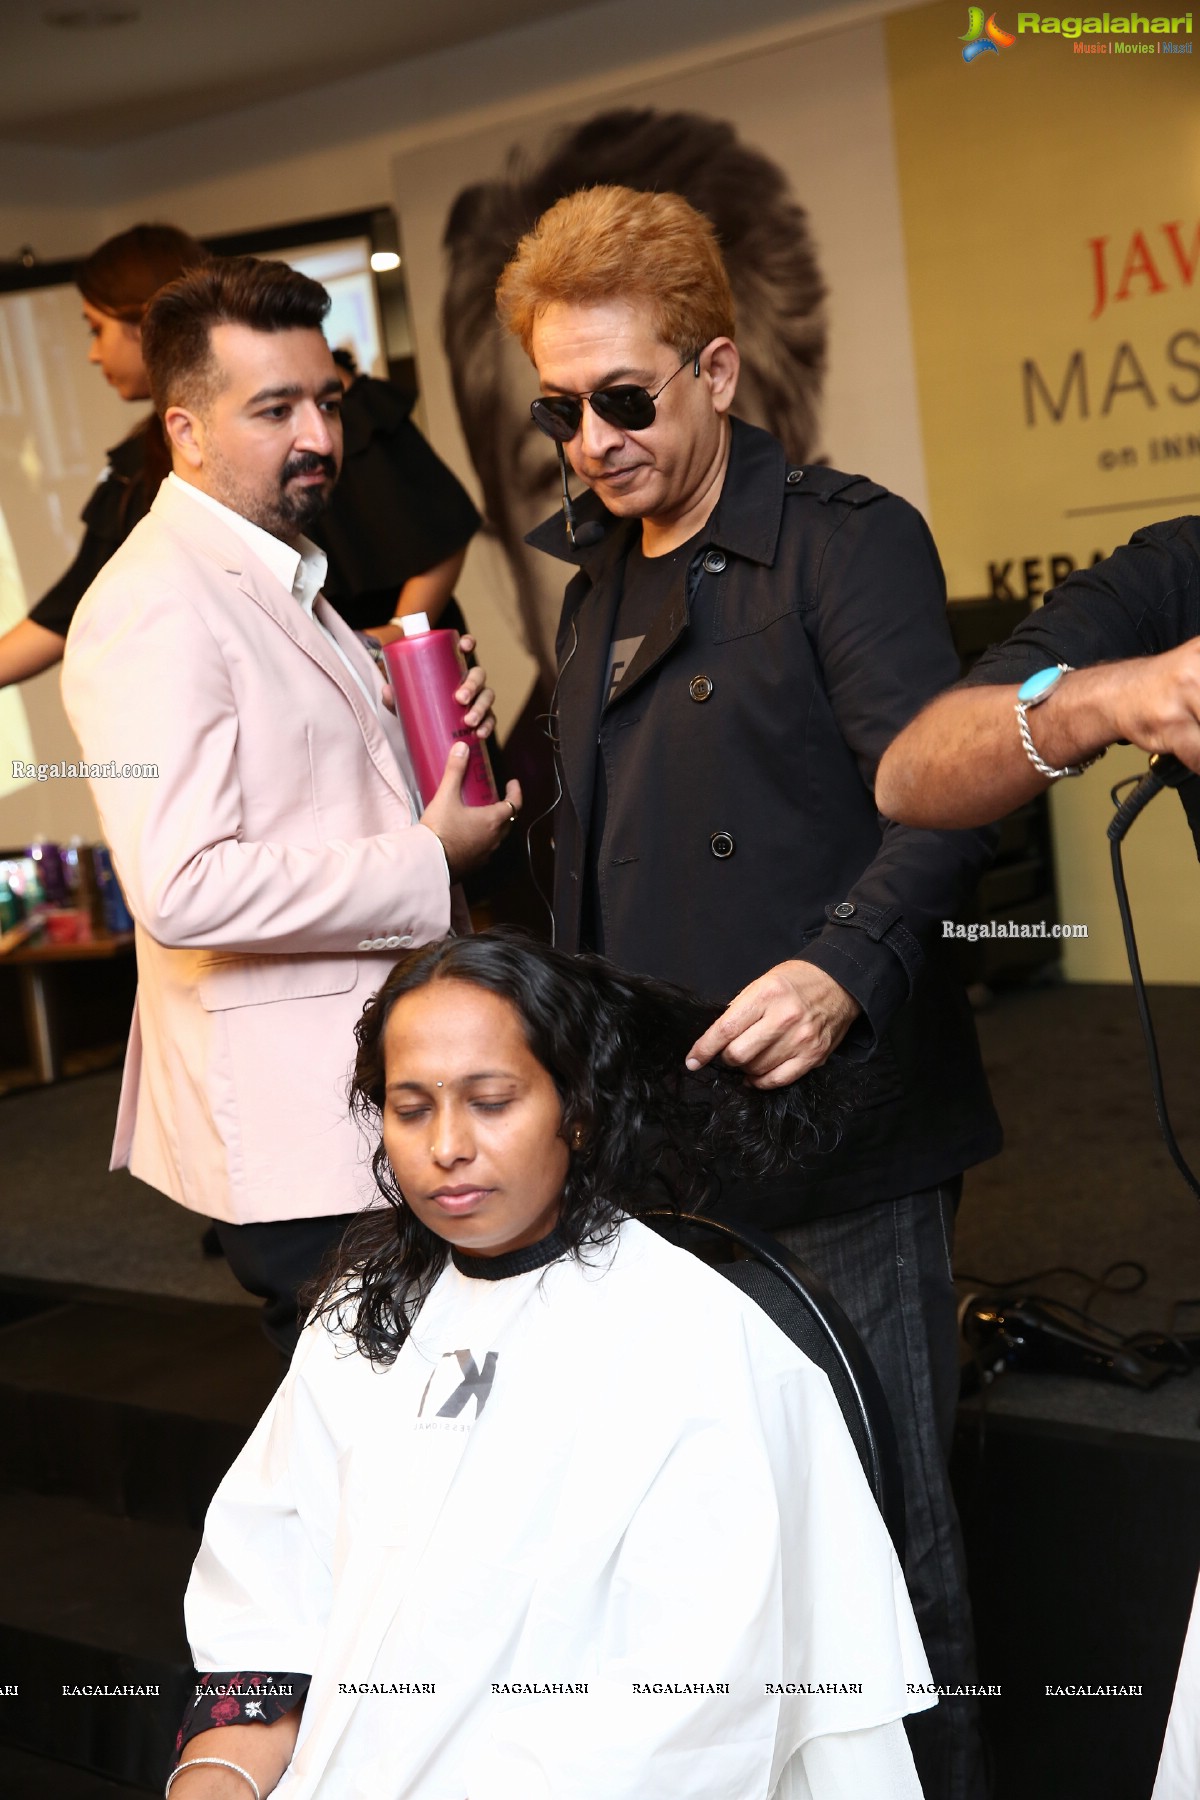 Jawed Habib Master Class on Innovation & Techniques in Kratin, Cysteine & Botox Hair Services at Lemon Tree Hotels